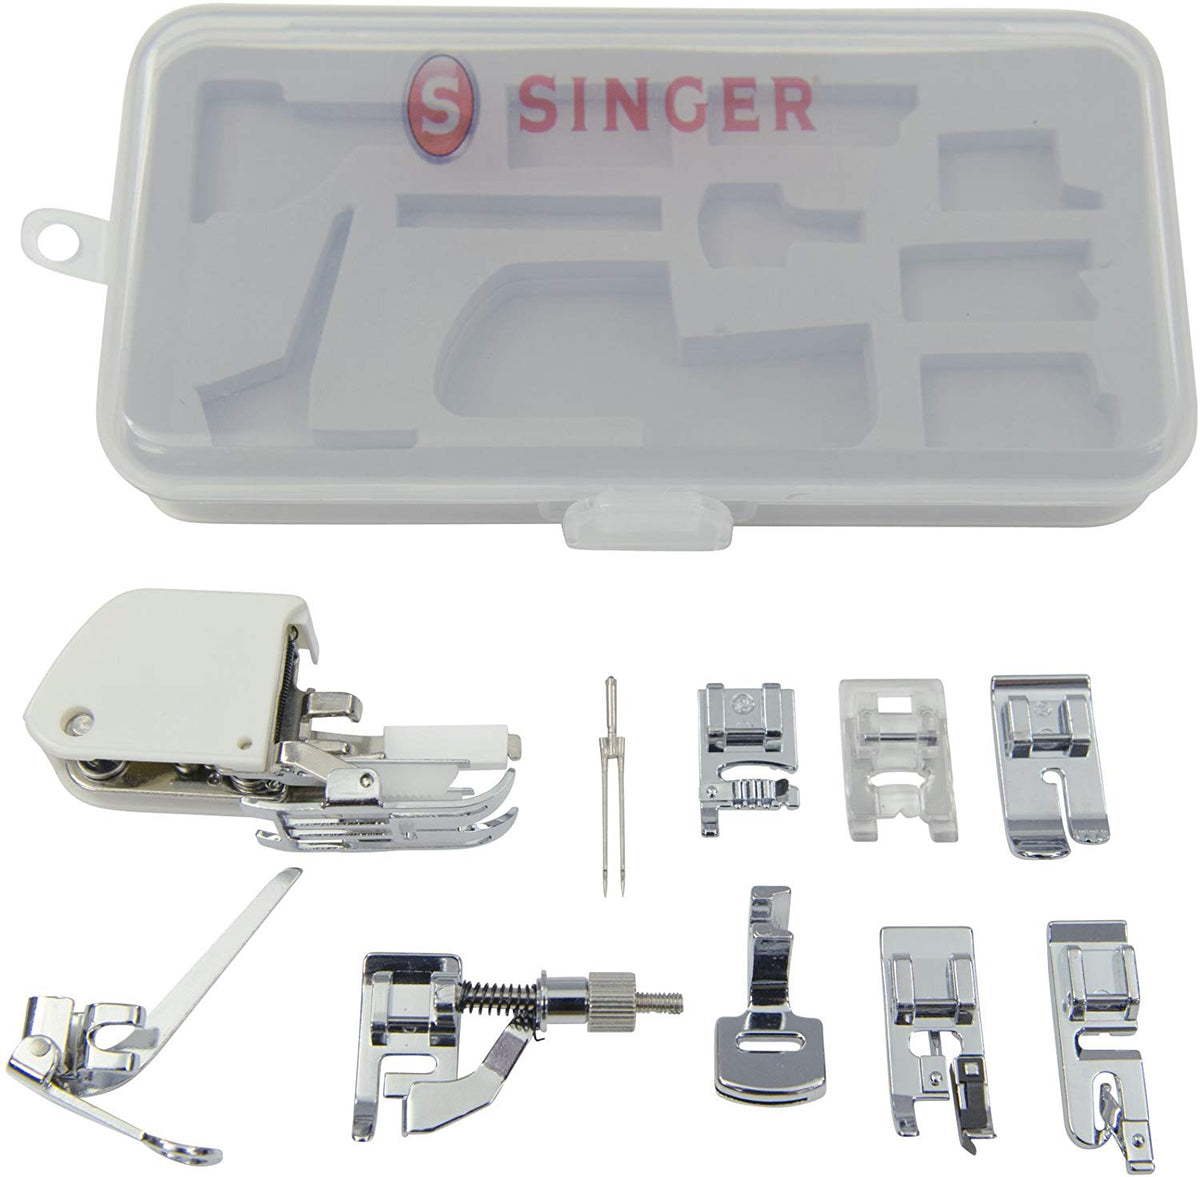 Singer Sewing Machine Accessory Kit, Including 9 Presser Feet